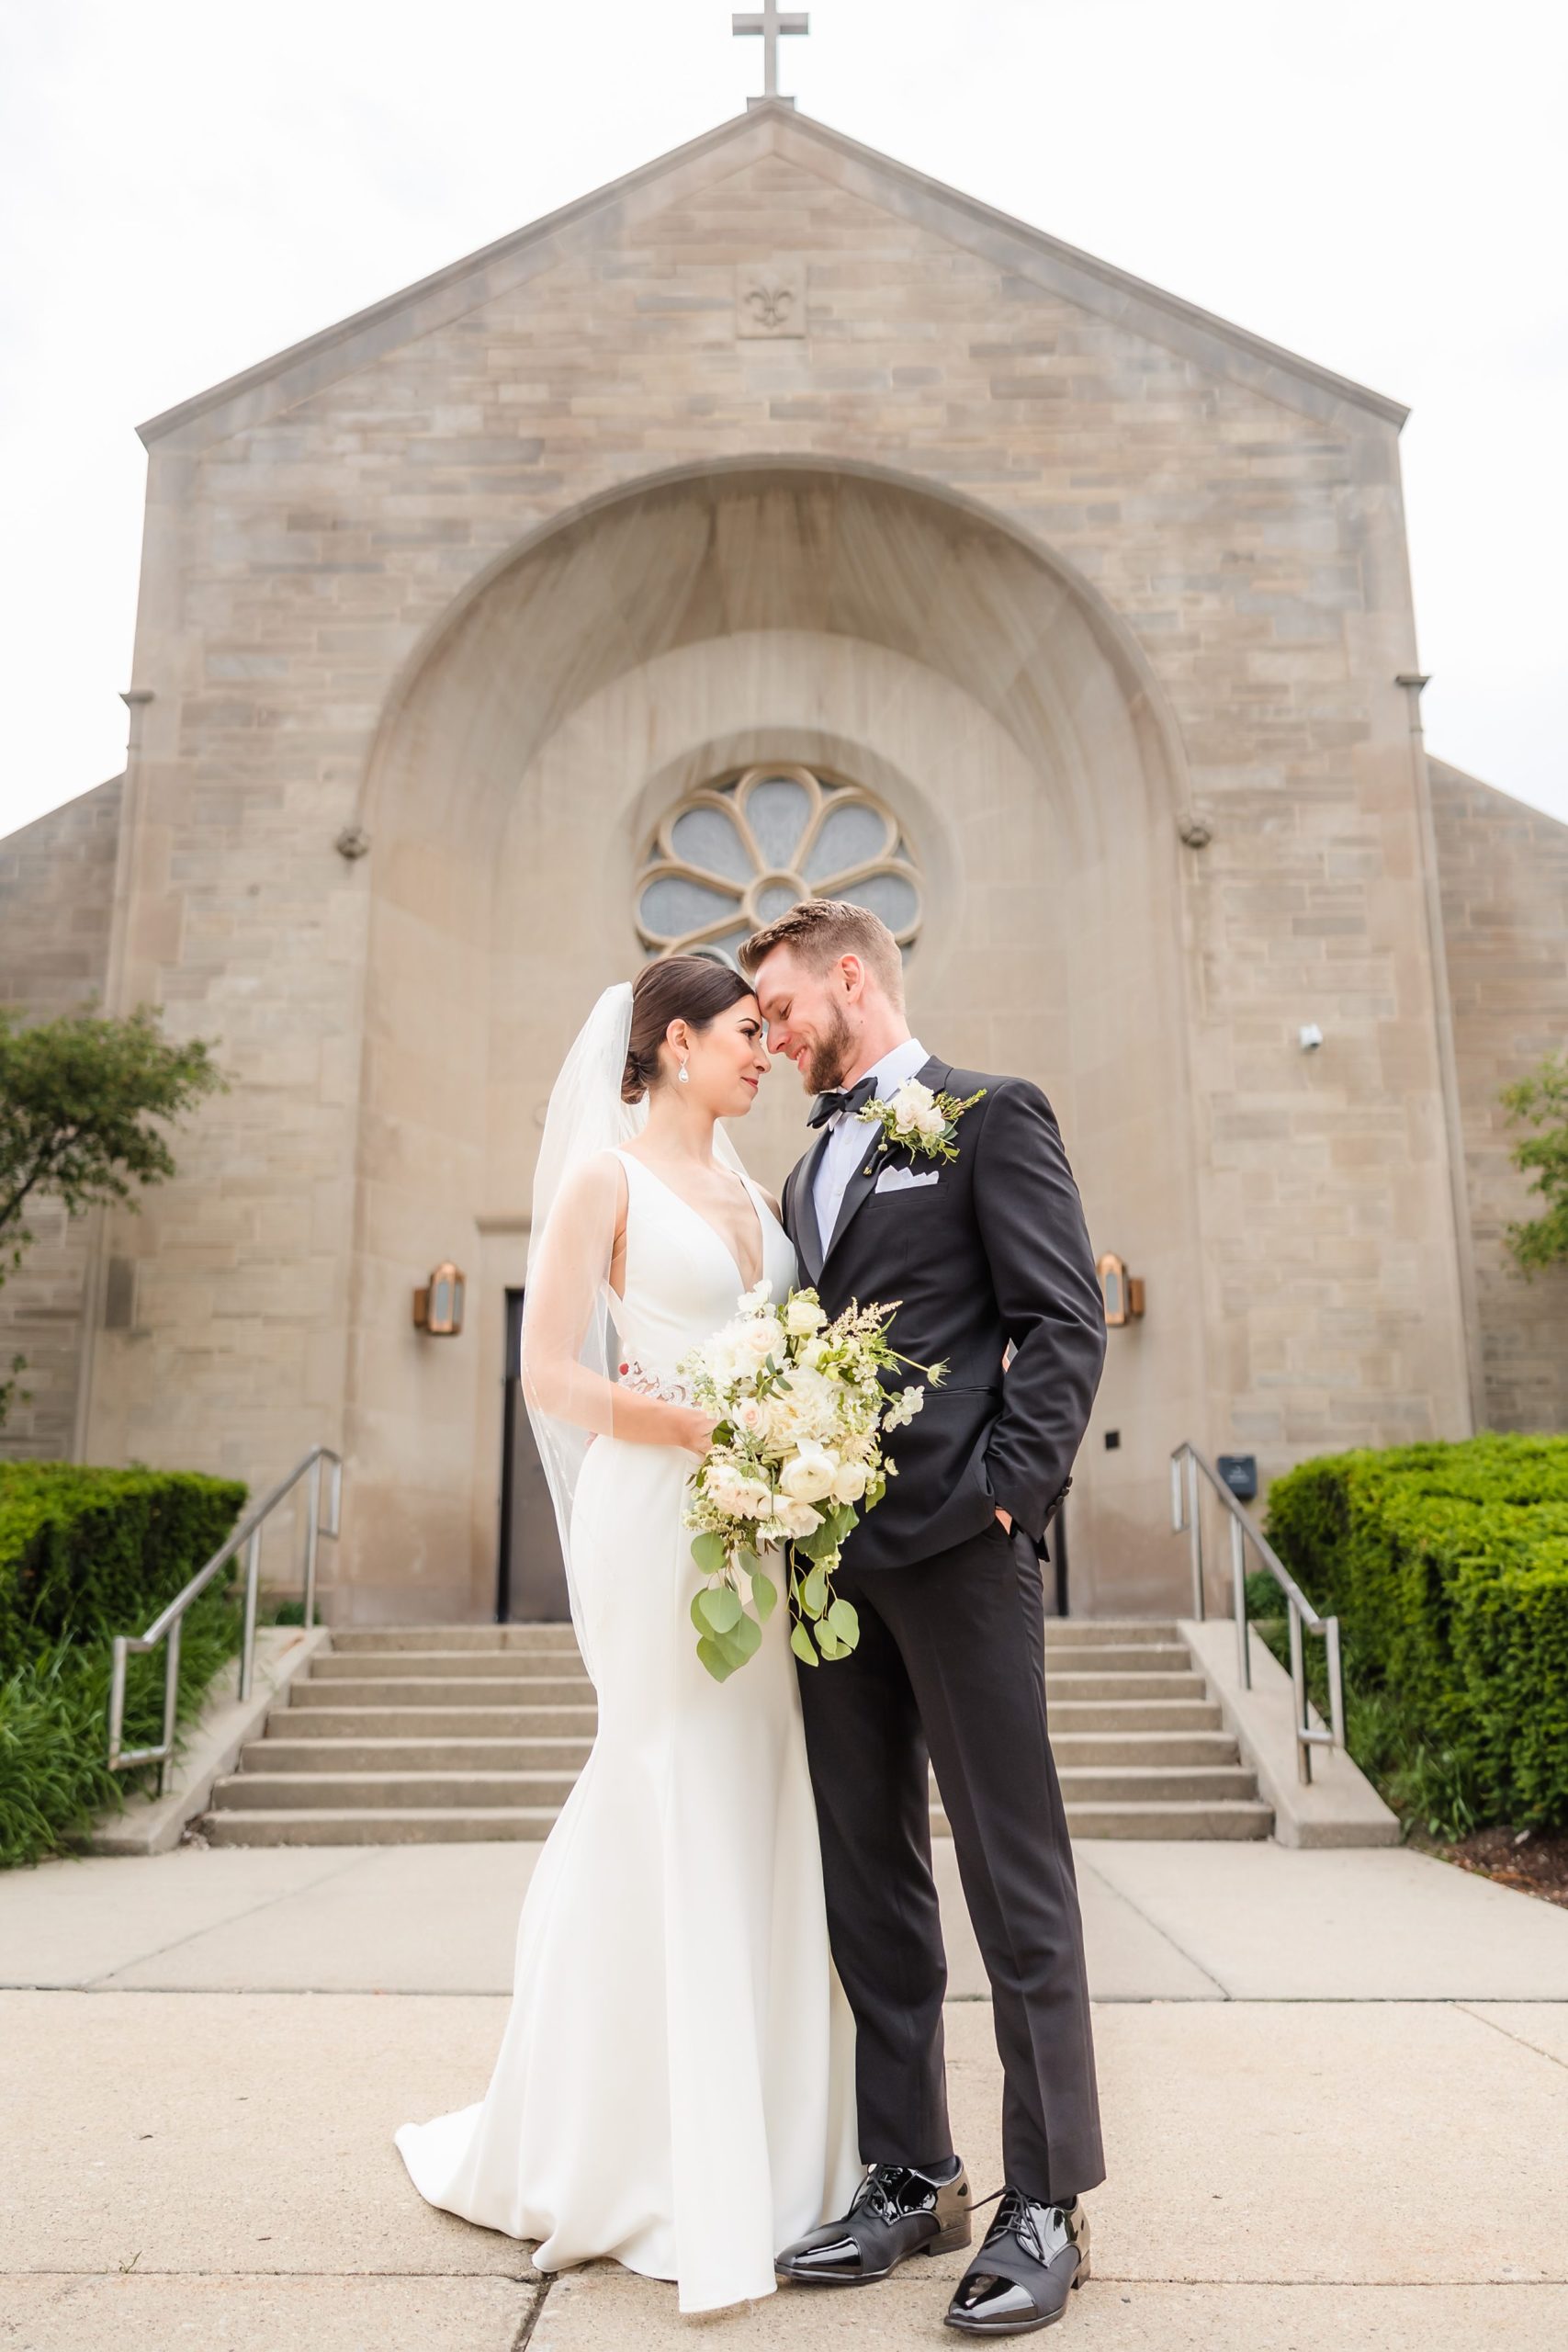 Bride and groom embrace after their wedding ceremony at Our Lady of the Wayside Church in Illinois.